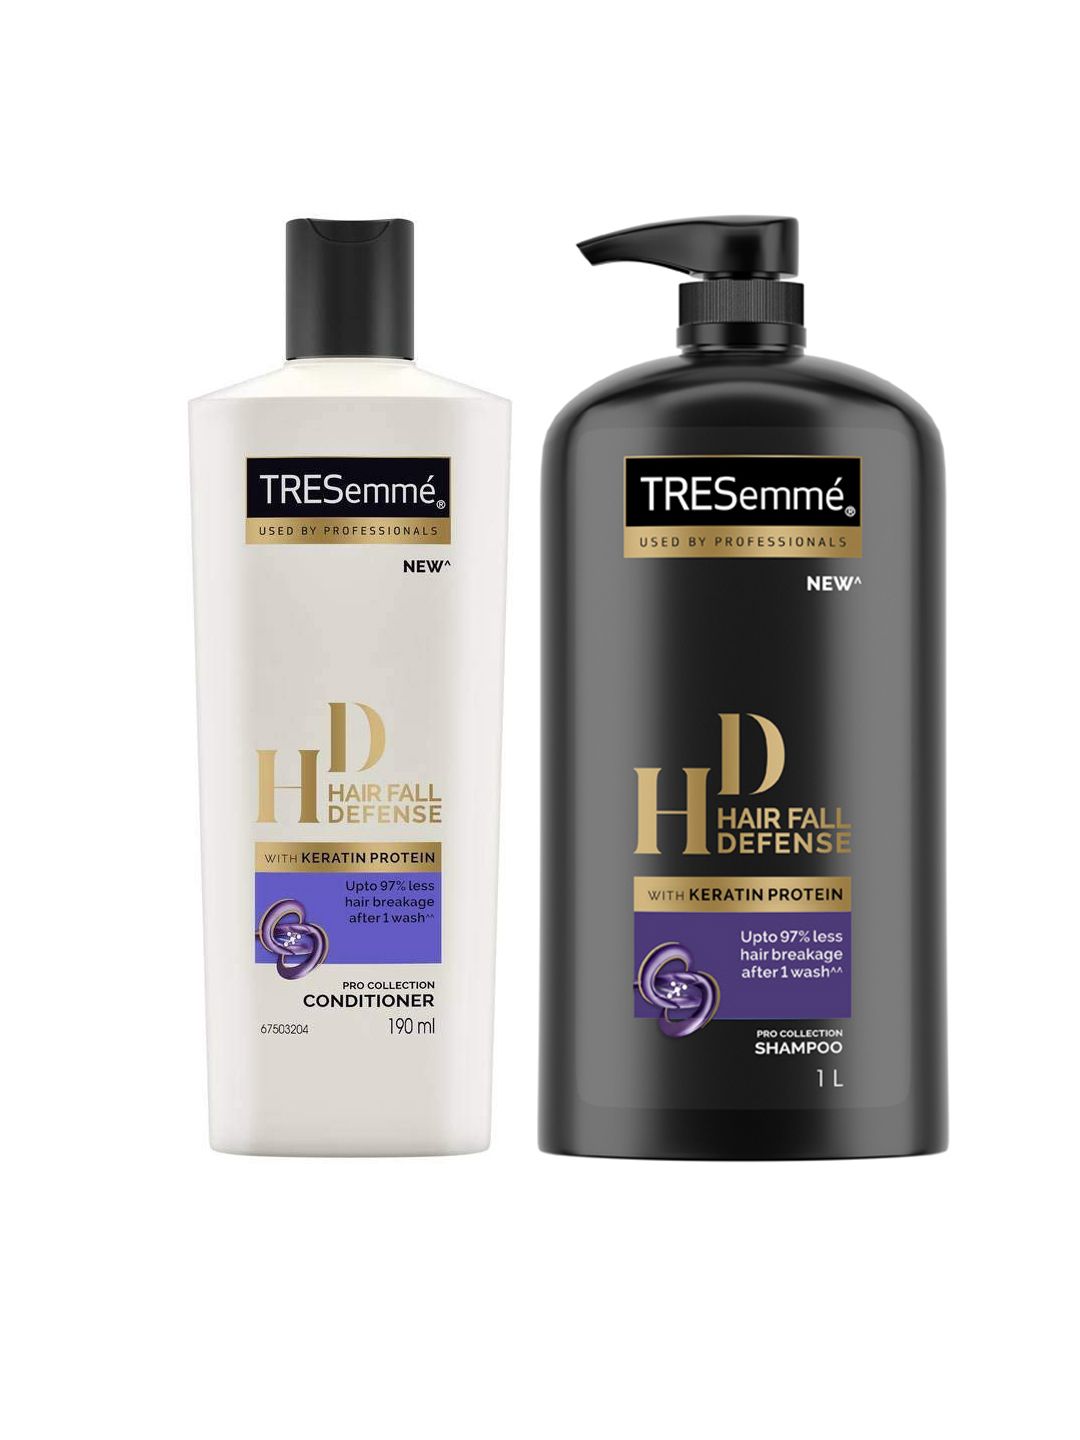 TRESemme Set of Hair Fall Defense Pro Collection Shampoo & Conditioner Price in India